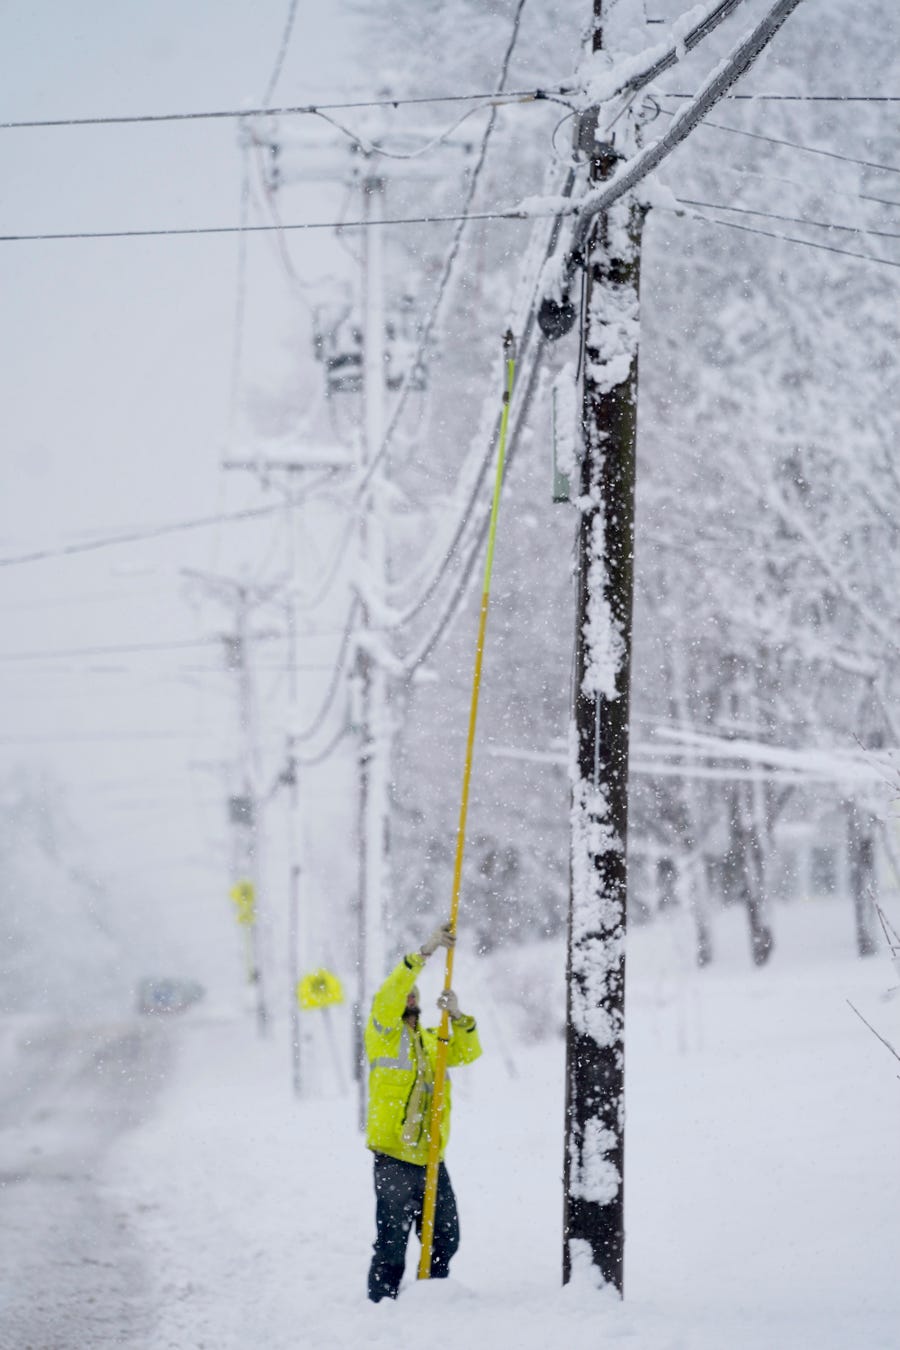 A contractor for Eversource uses a fiberglass pole to replace a fuse that broke, Tuesday, March 14, 2023, in Pittsfield, Mass. The New England states and parts of New York are bracing for a winter storm due to last into Wednesday. (Ben Garver/The Berkshire Eagle via AP)